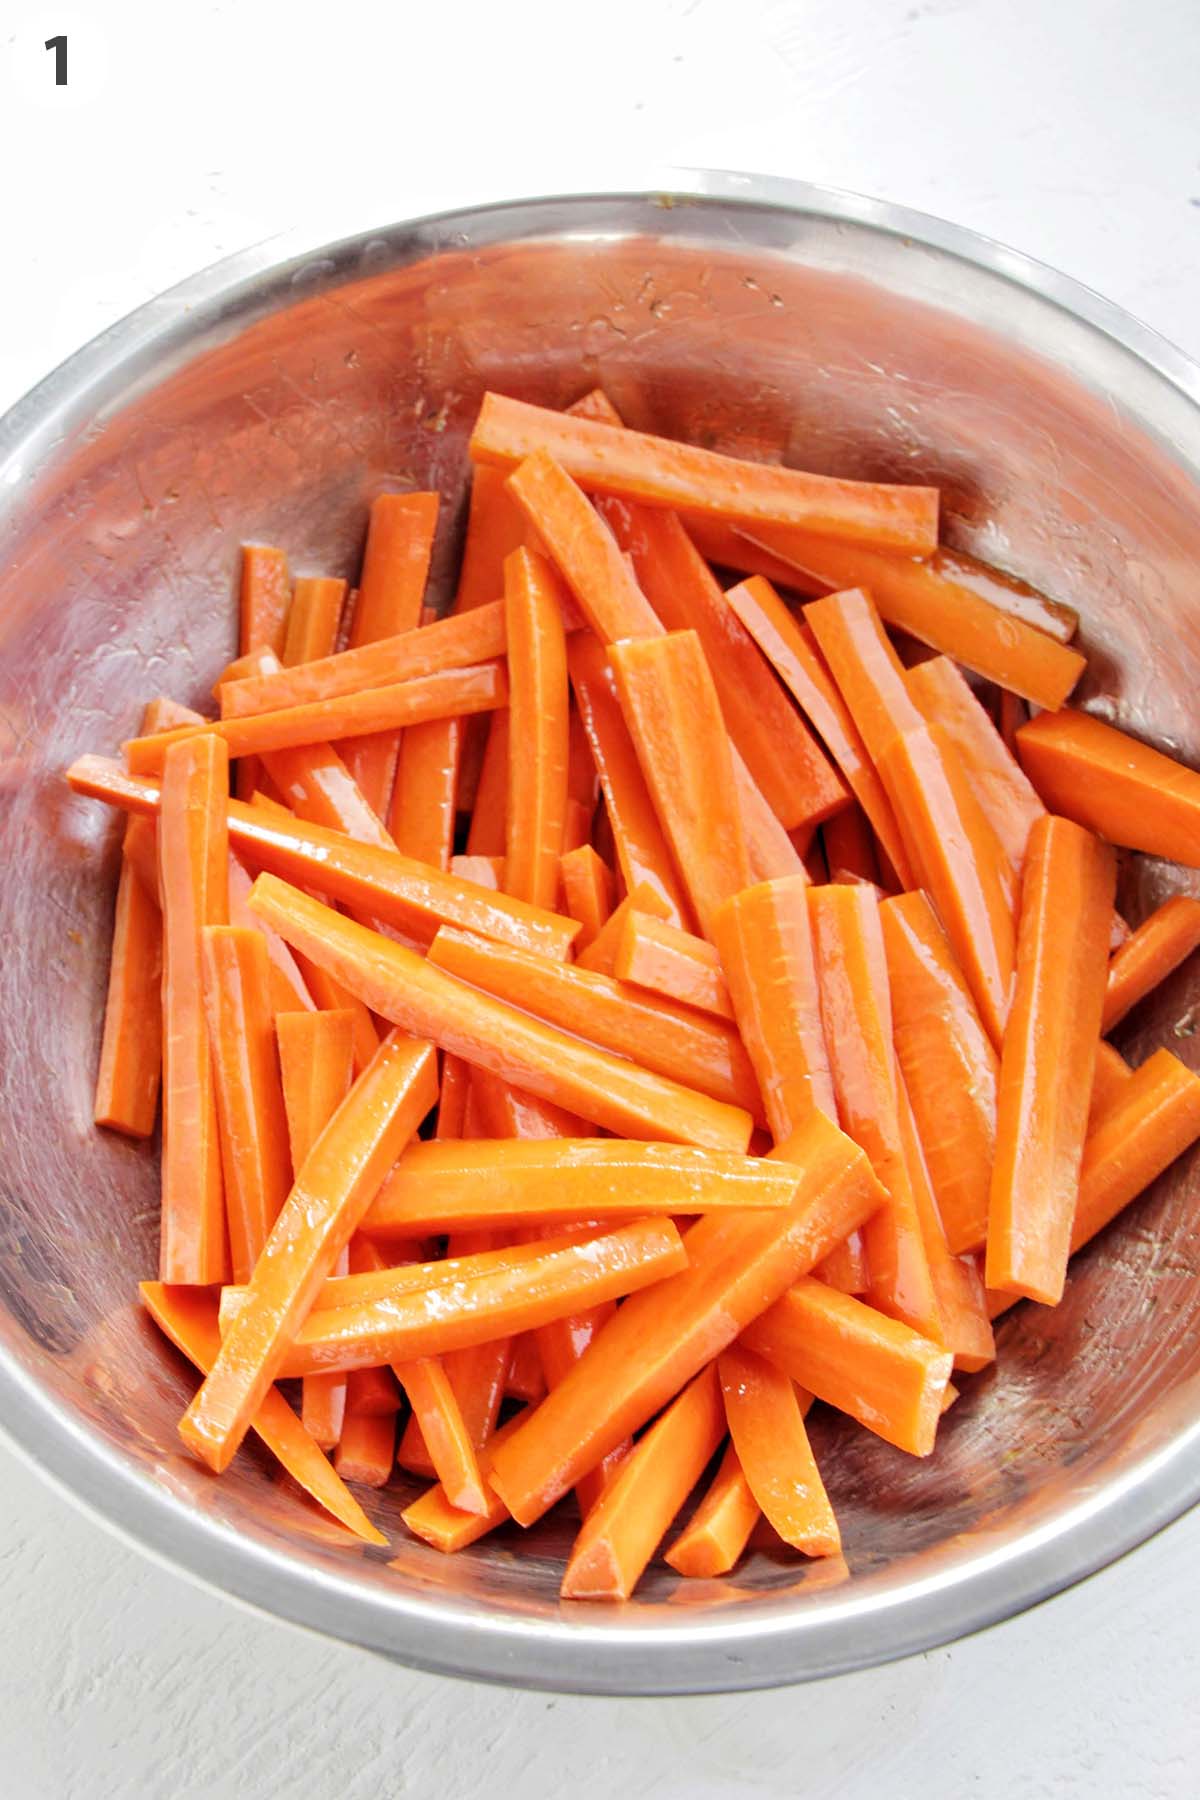 numbered photo showing carrot sticks in a mixing bowl.